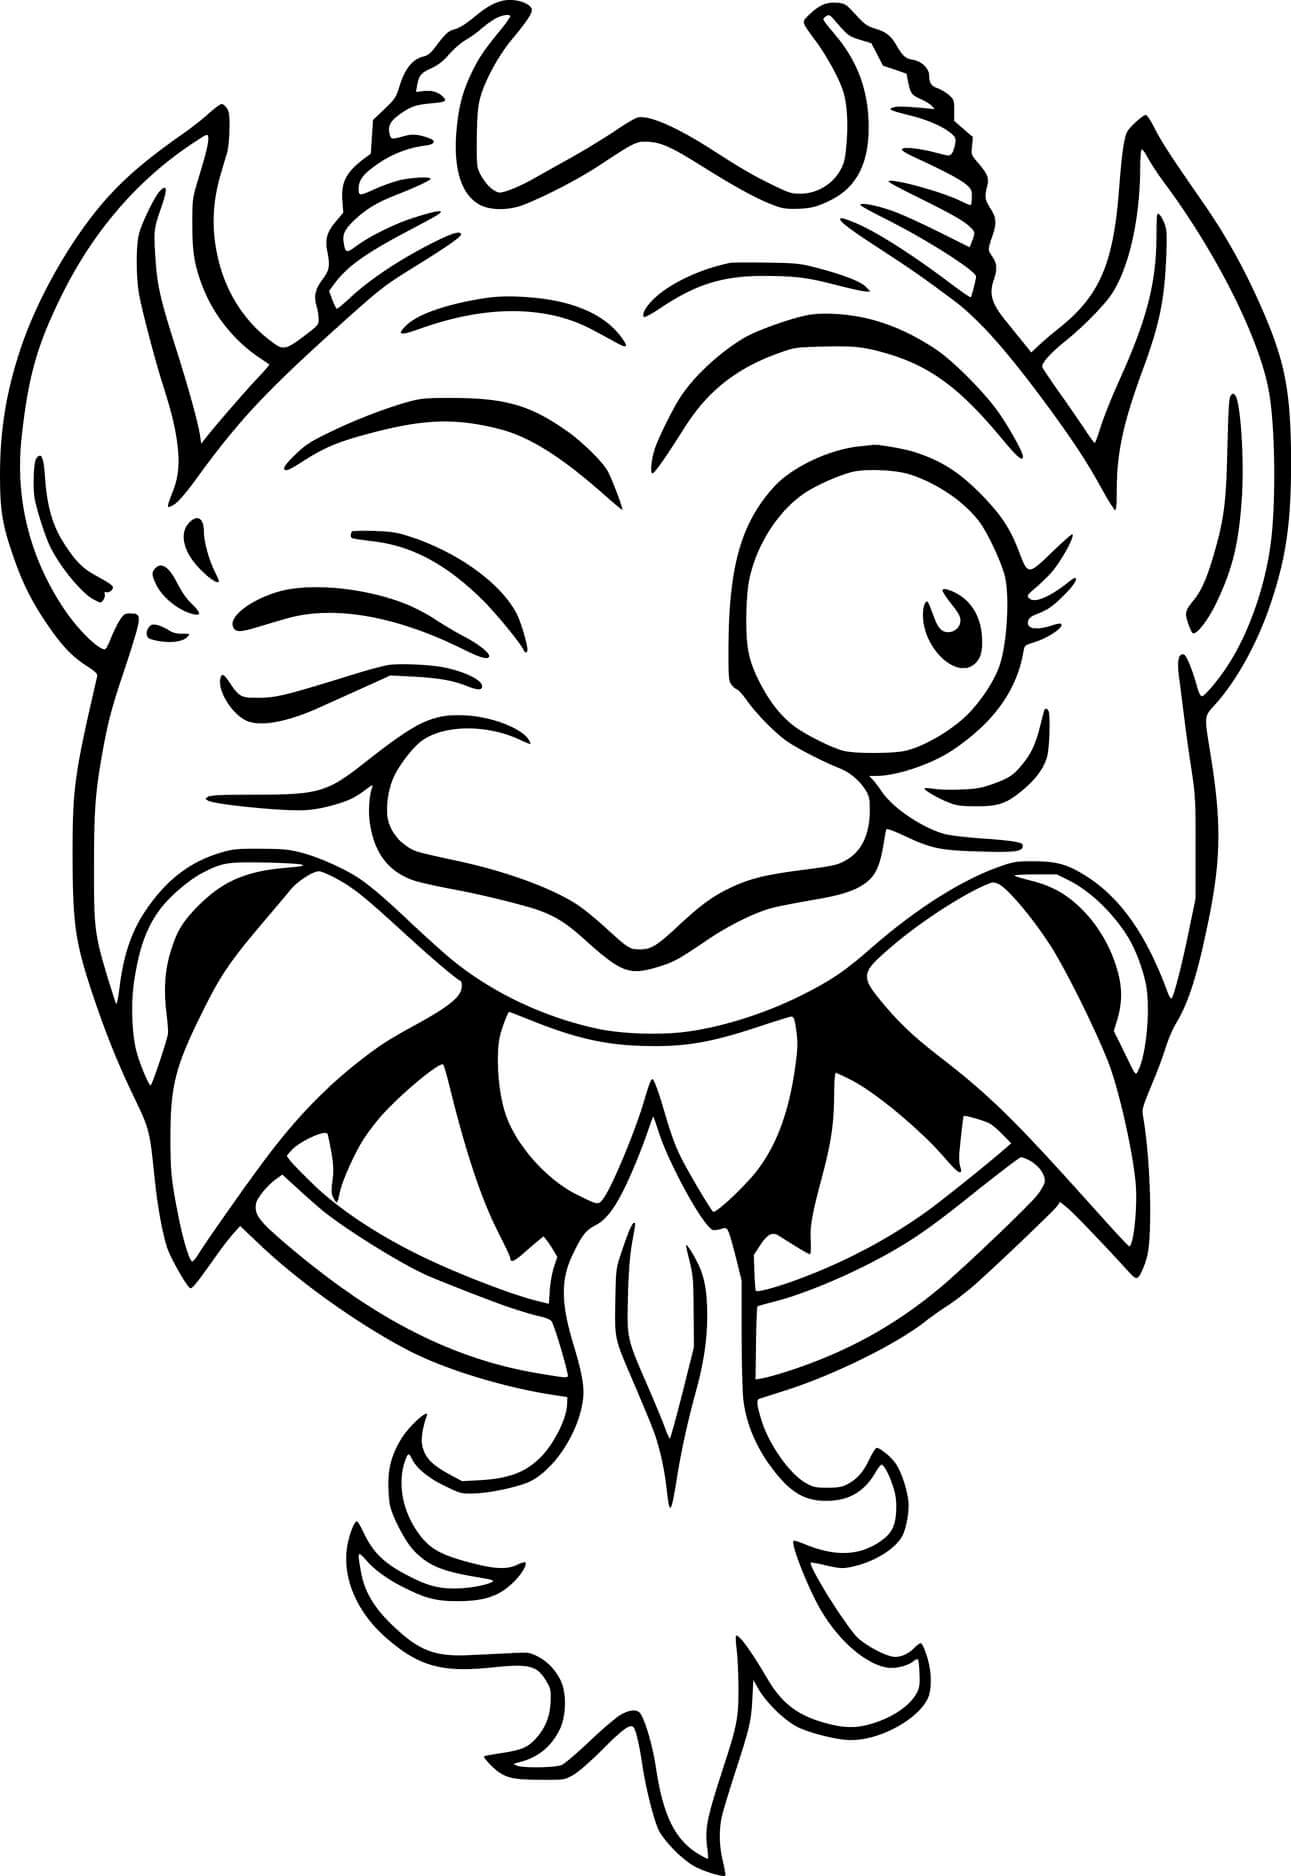 Monster Coloring Pages - Coloring Cool